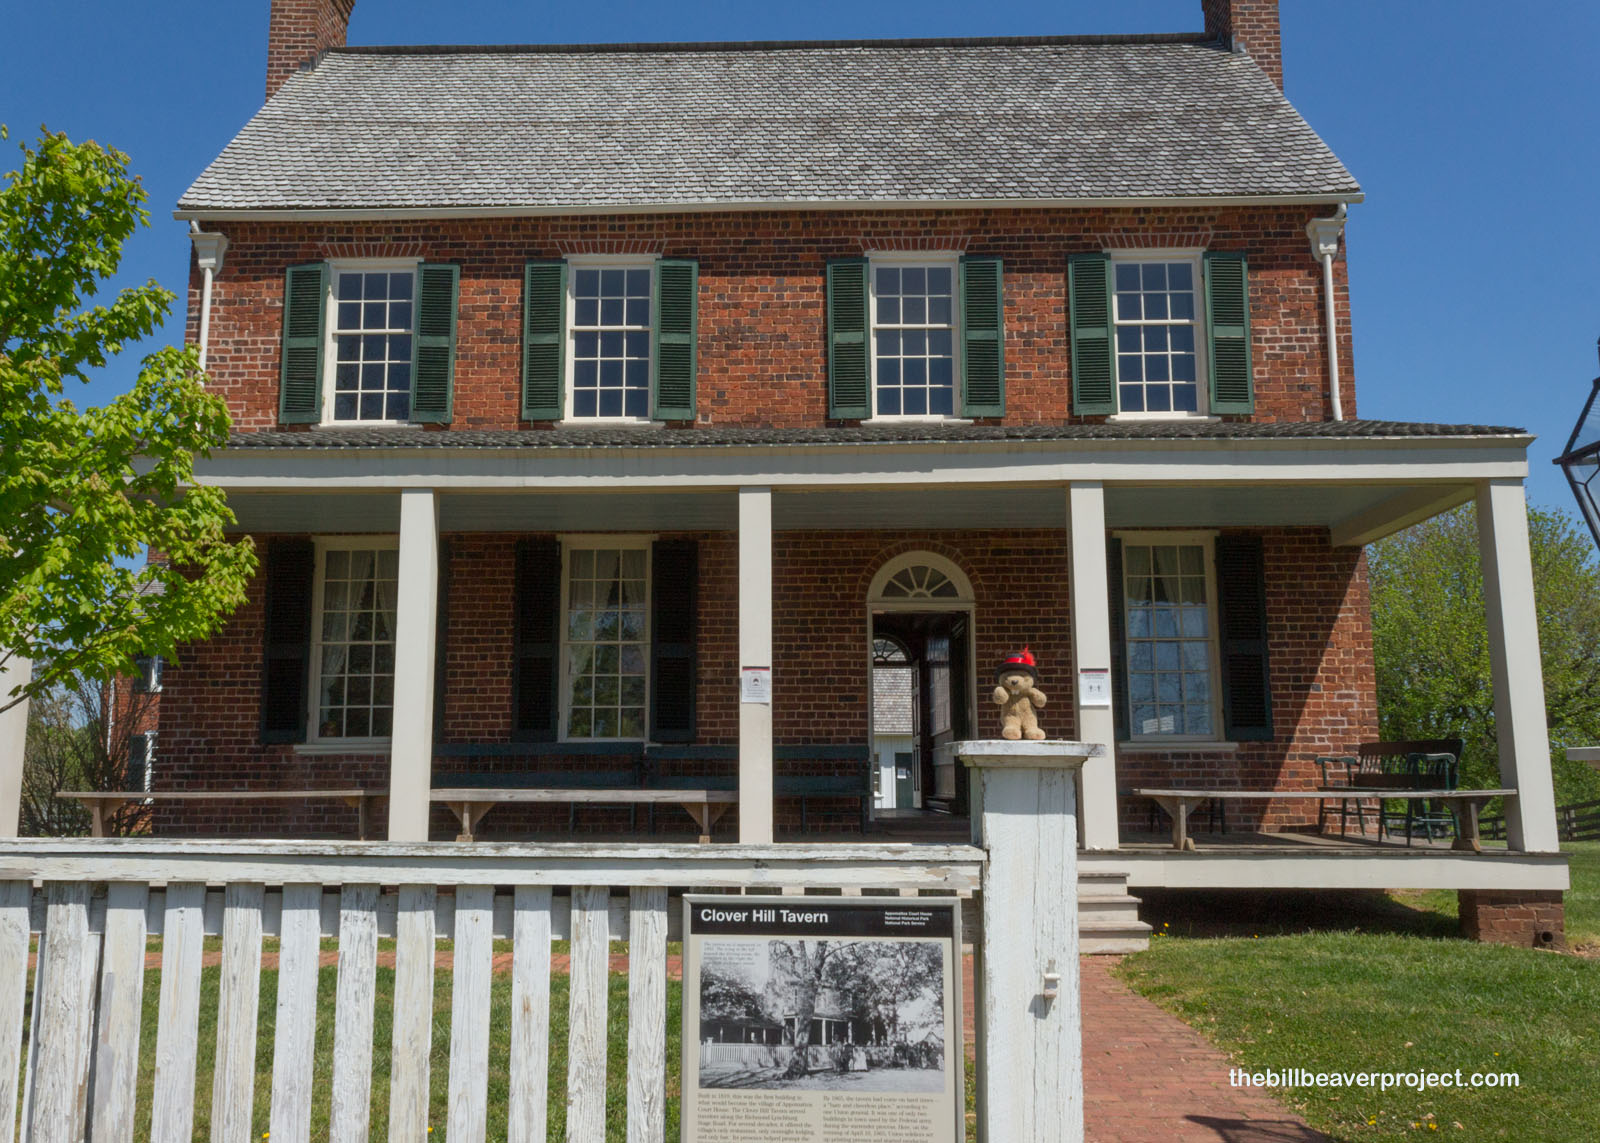 The Clover Hill Tavern is the oldest surviving building here!